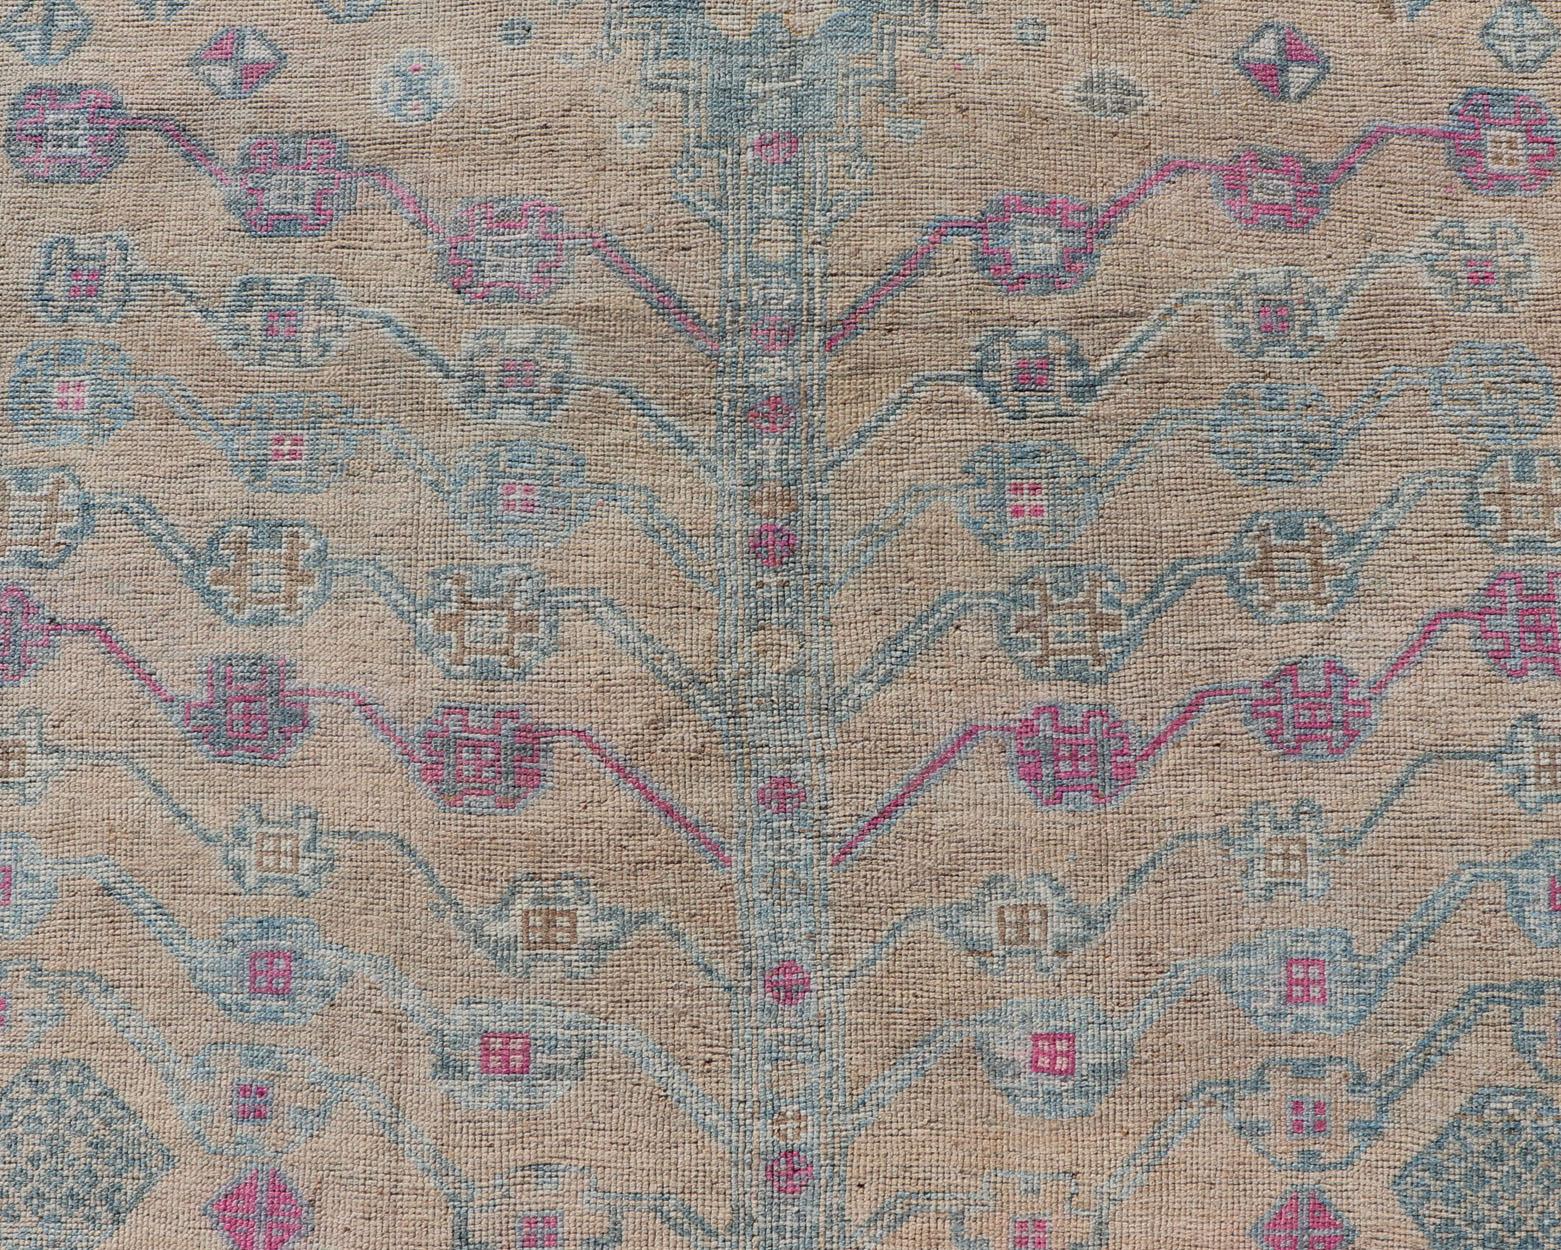 Hand-Knotted Vintage Persian Shiraz with Tribal Design in Soft Yellow, Pink, and Blue Gray